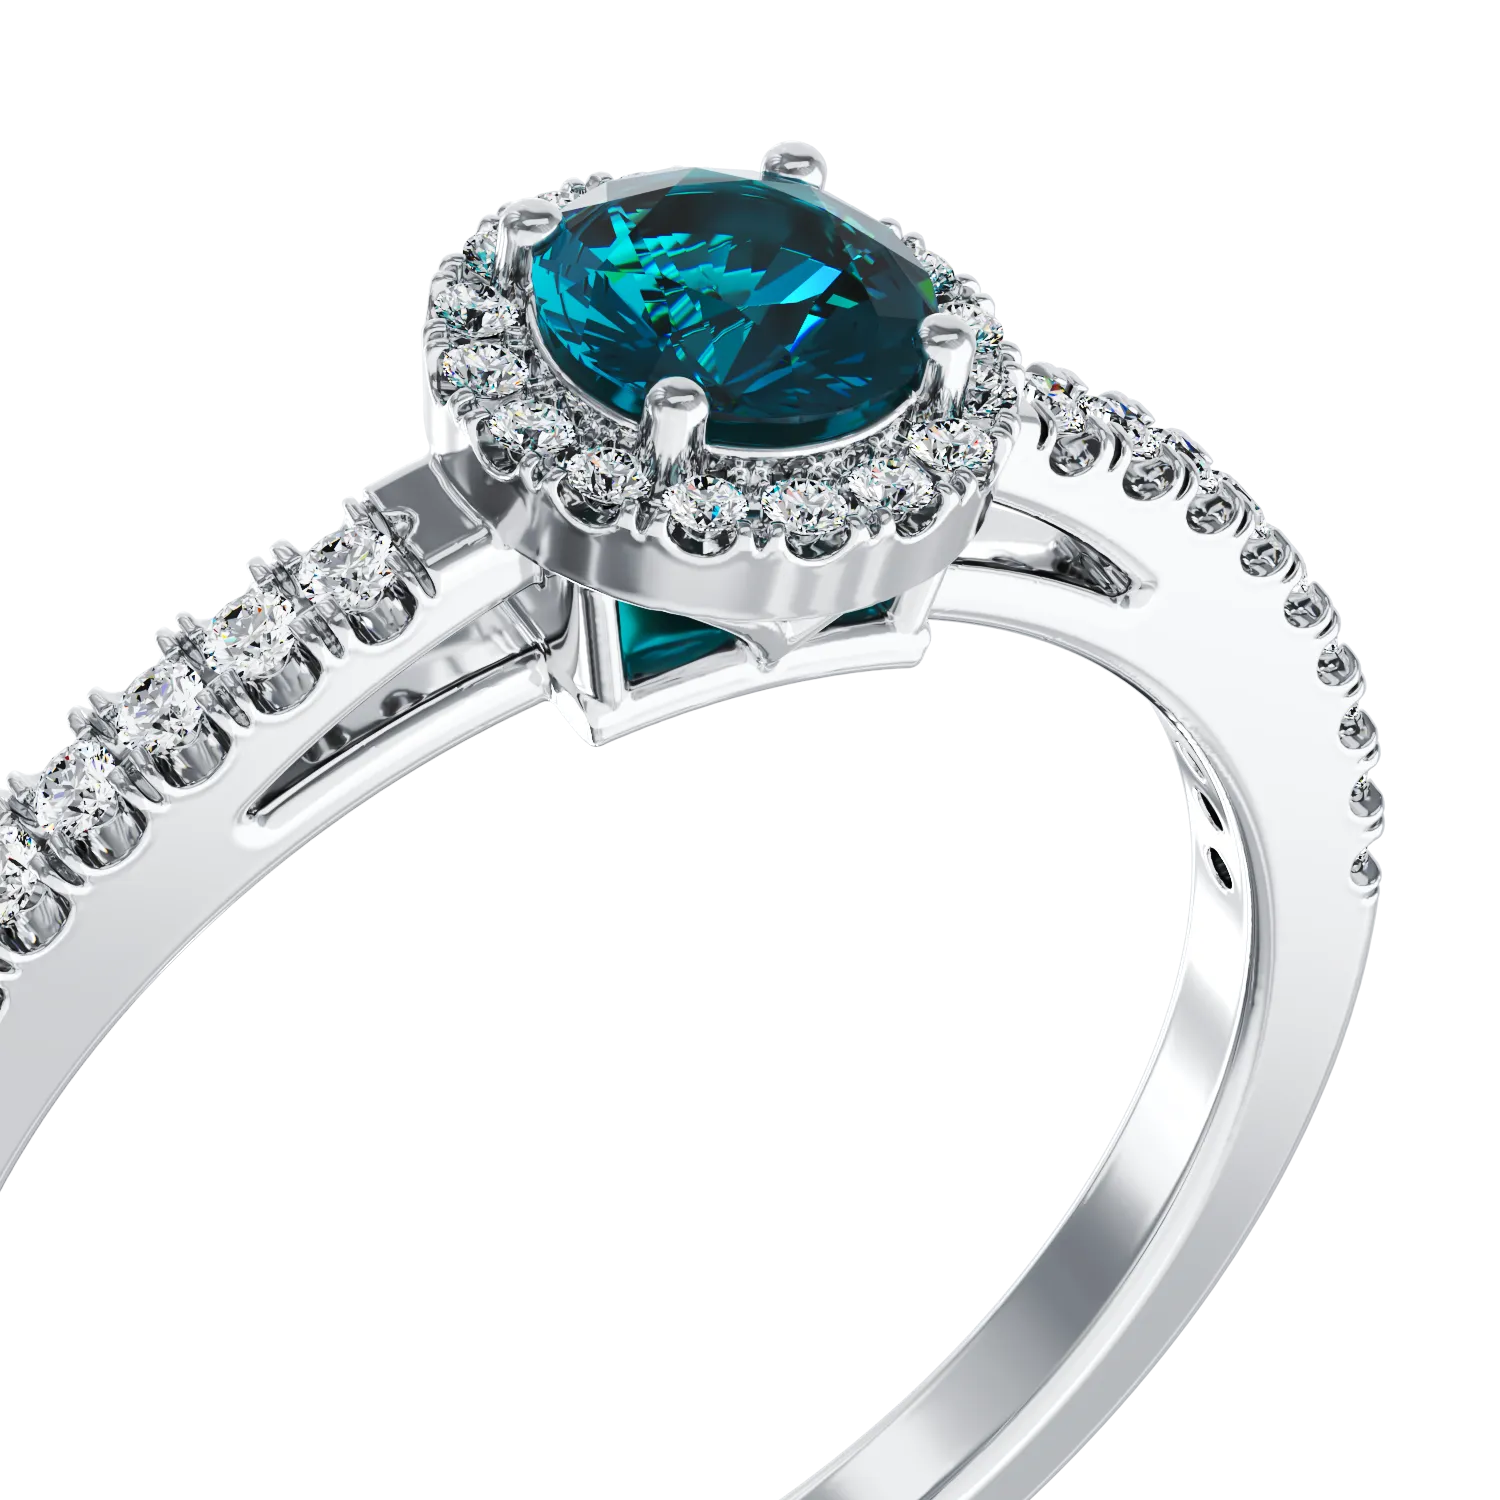 18K white gold engagement ring with 0.51ct blue diamond and 0.22ct Clear diamonds